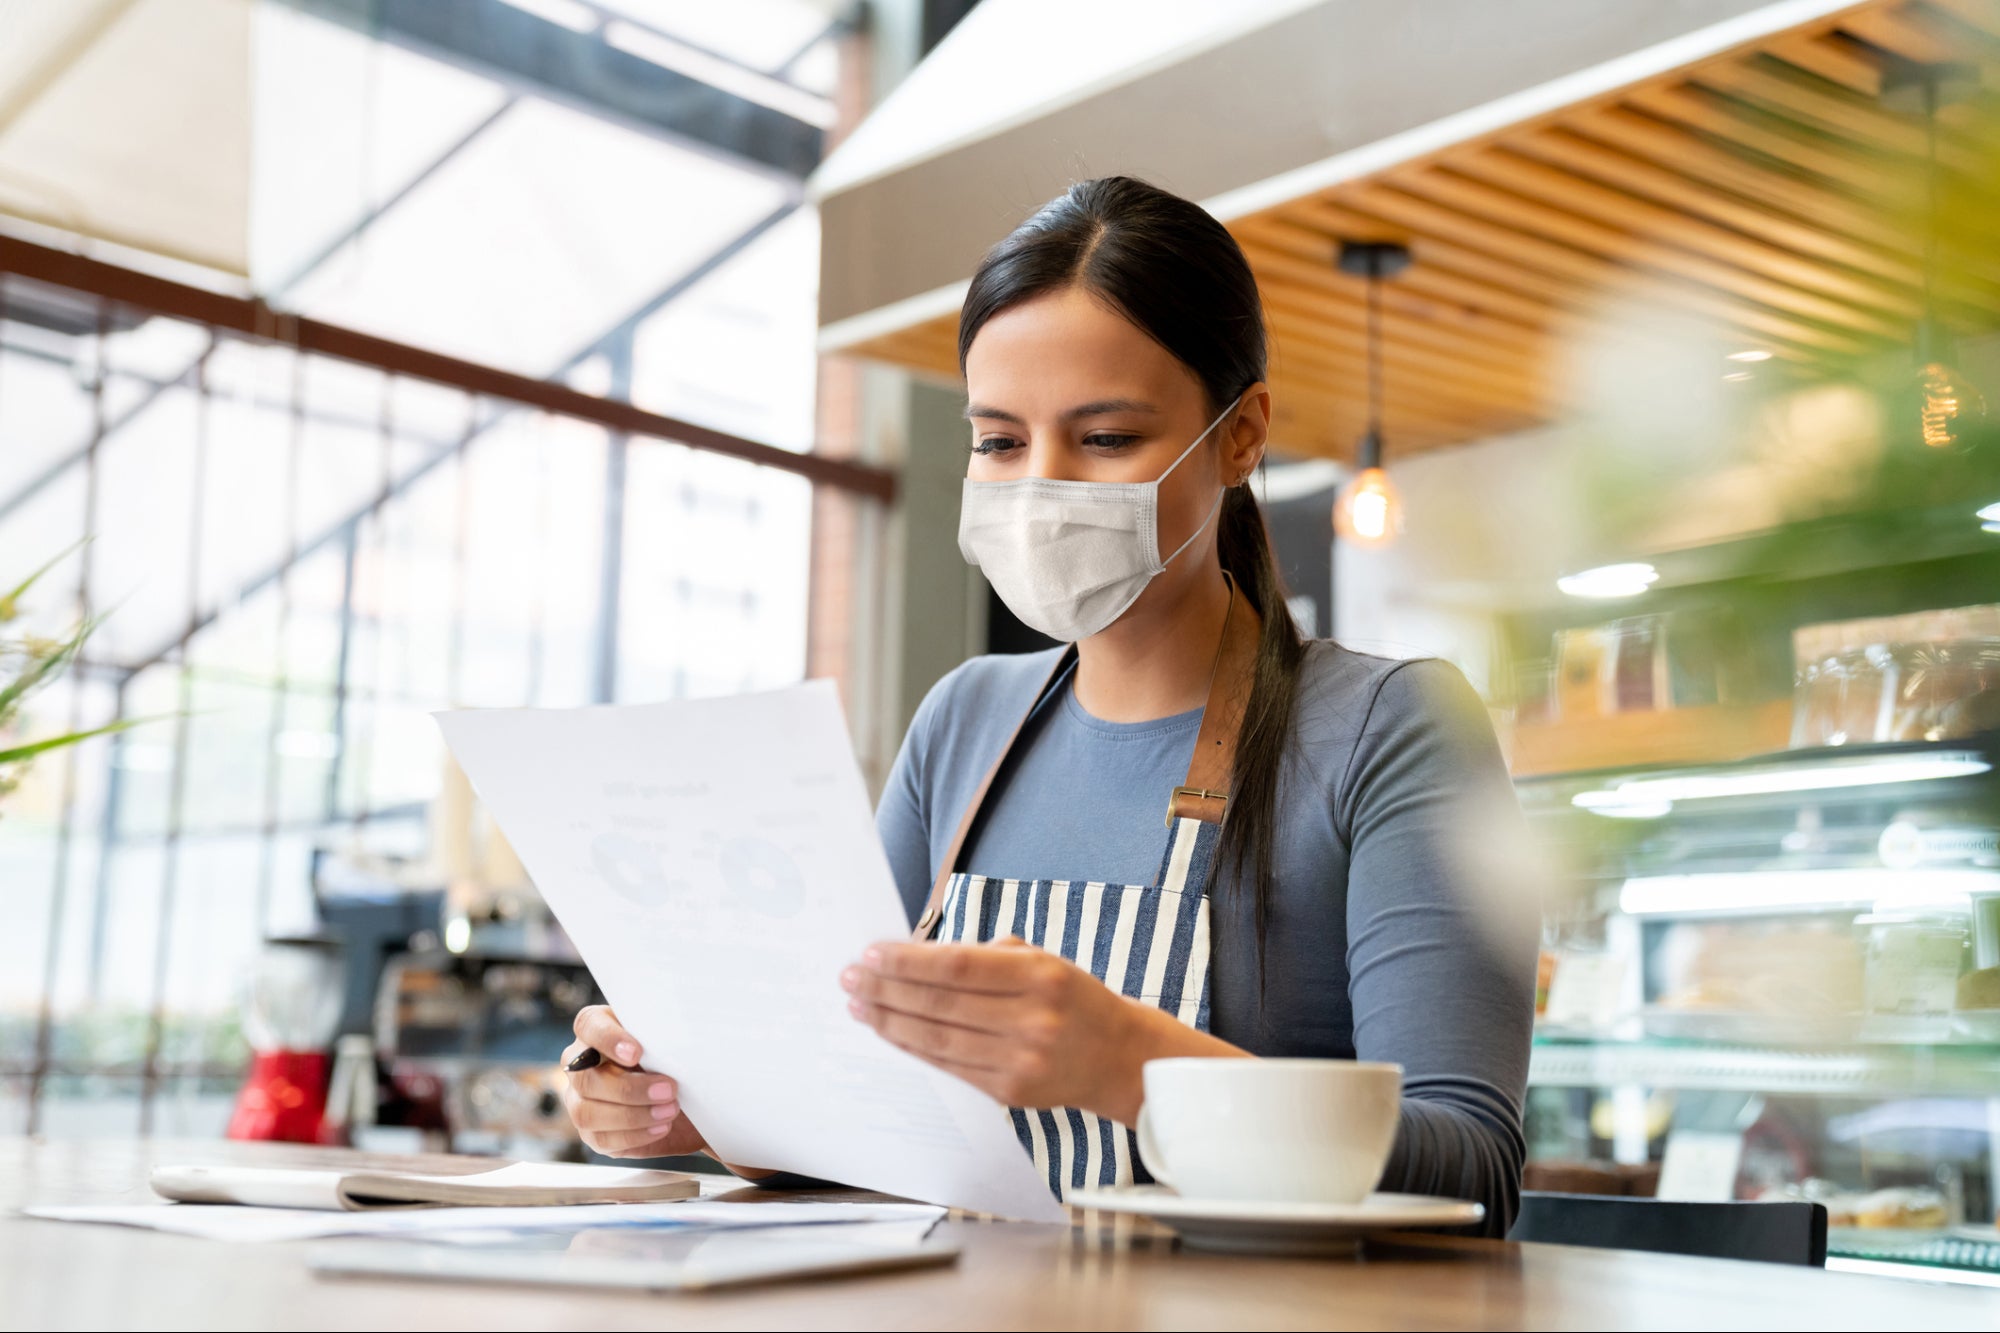 5 Ways to Help Your Small Business Survive During the Pandemic